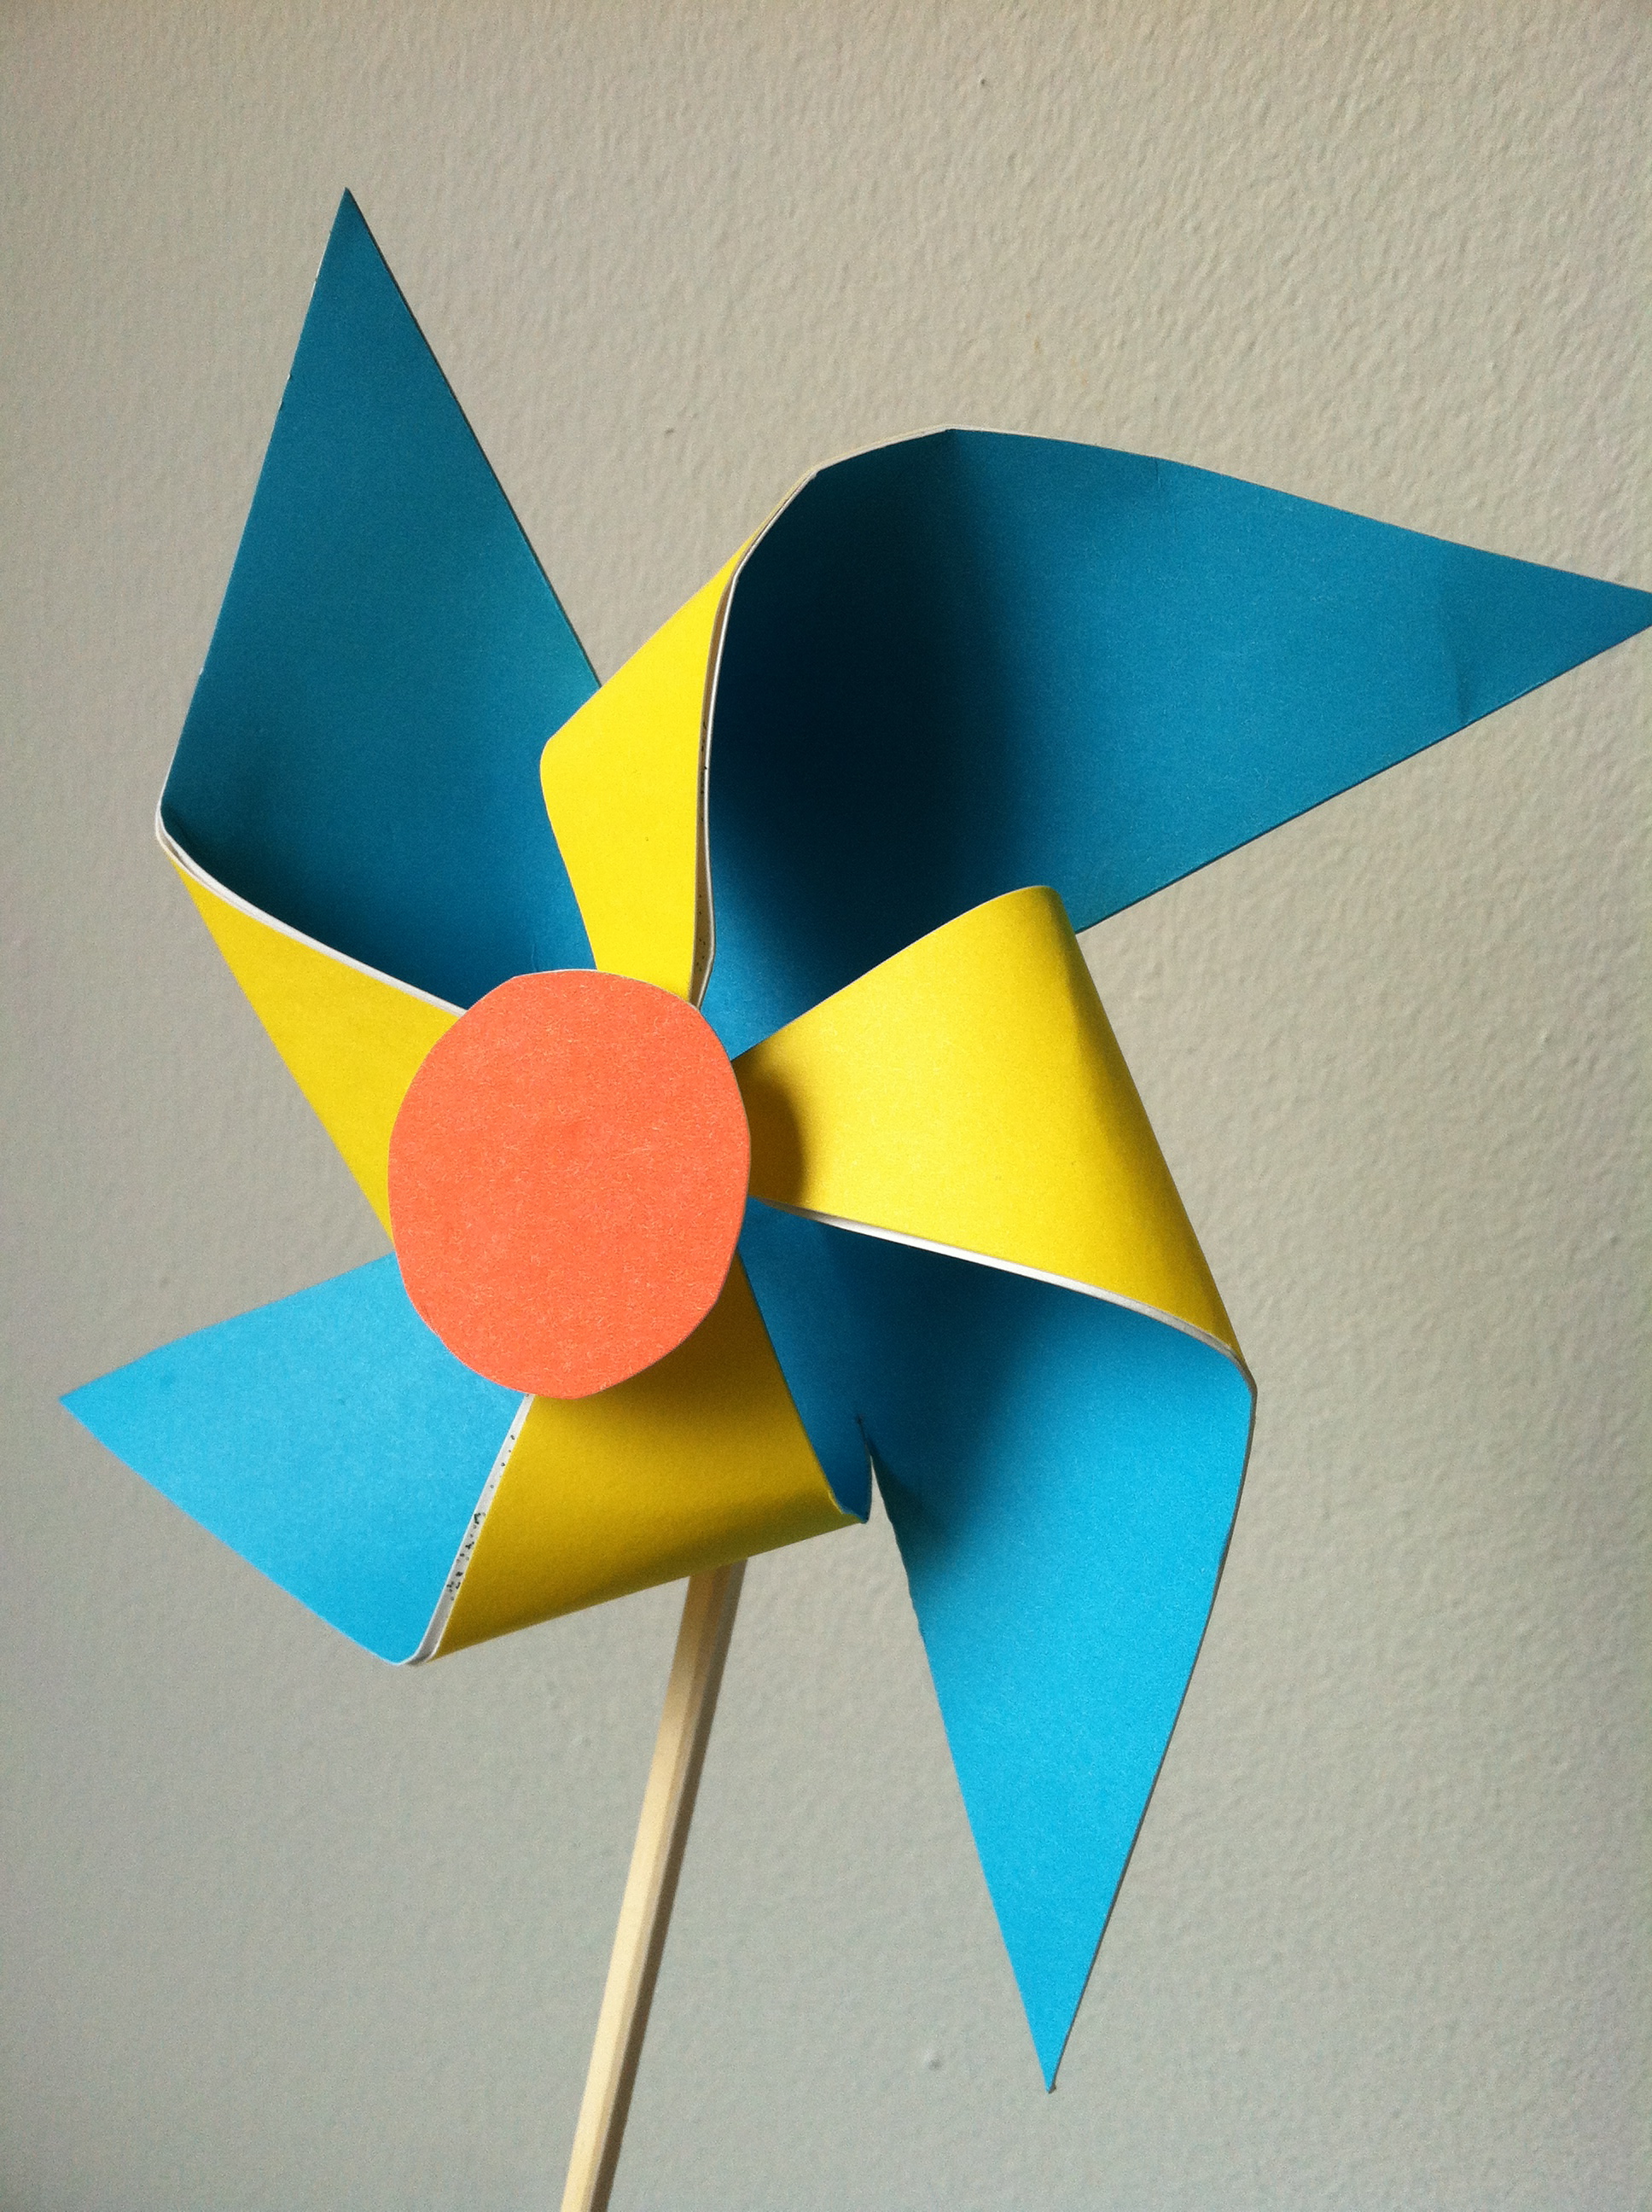 Now you have your very own paper windmill!